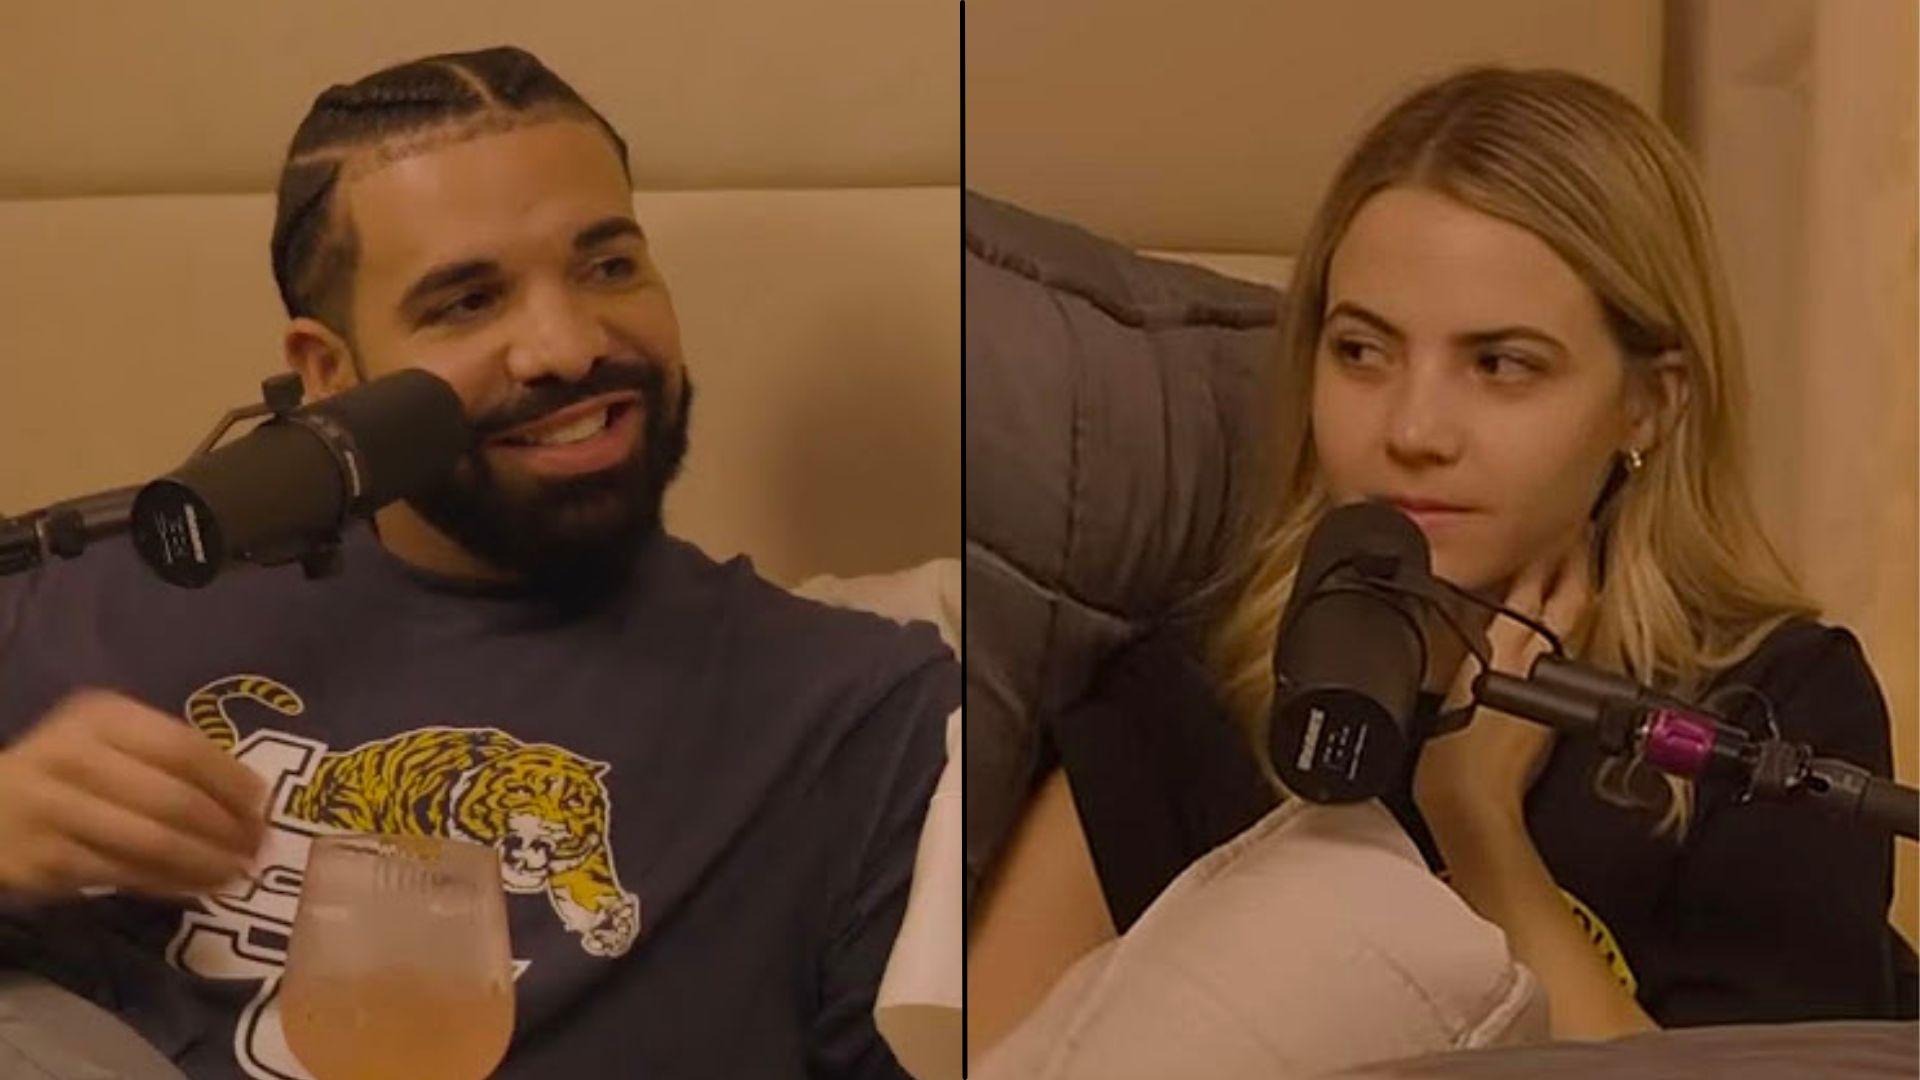 Drake and Bobbi Althoff side-by-side in bed with interview mics